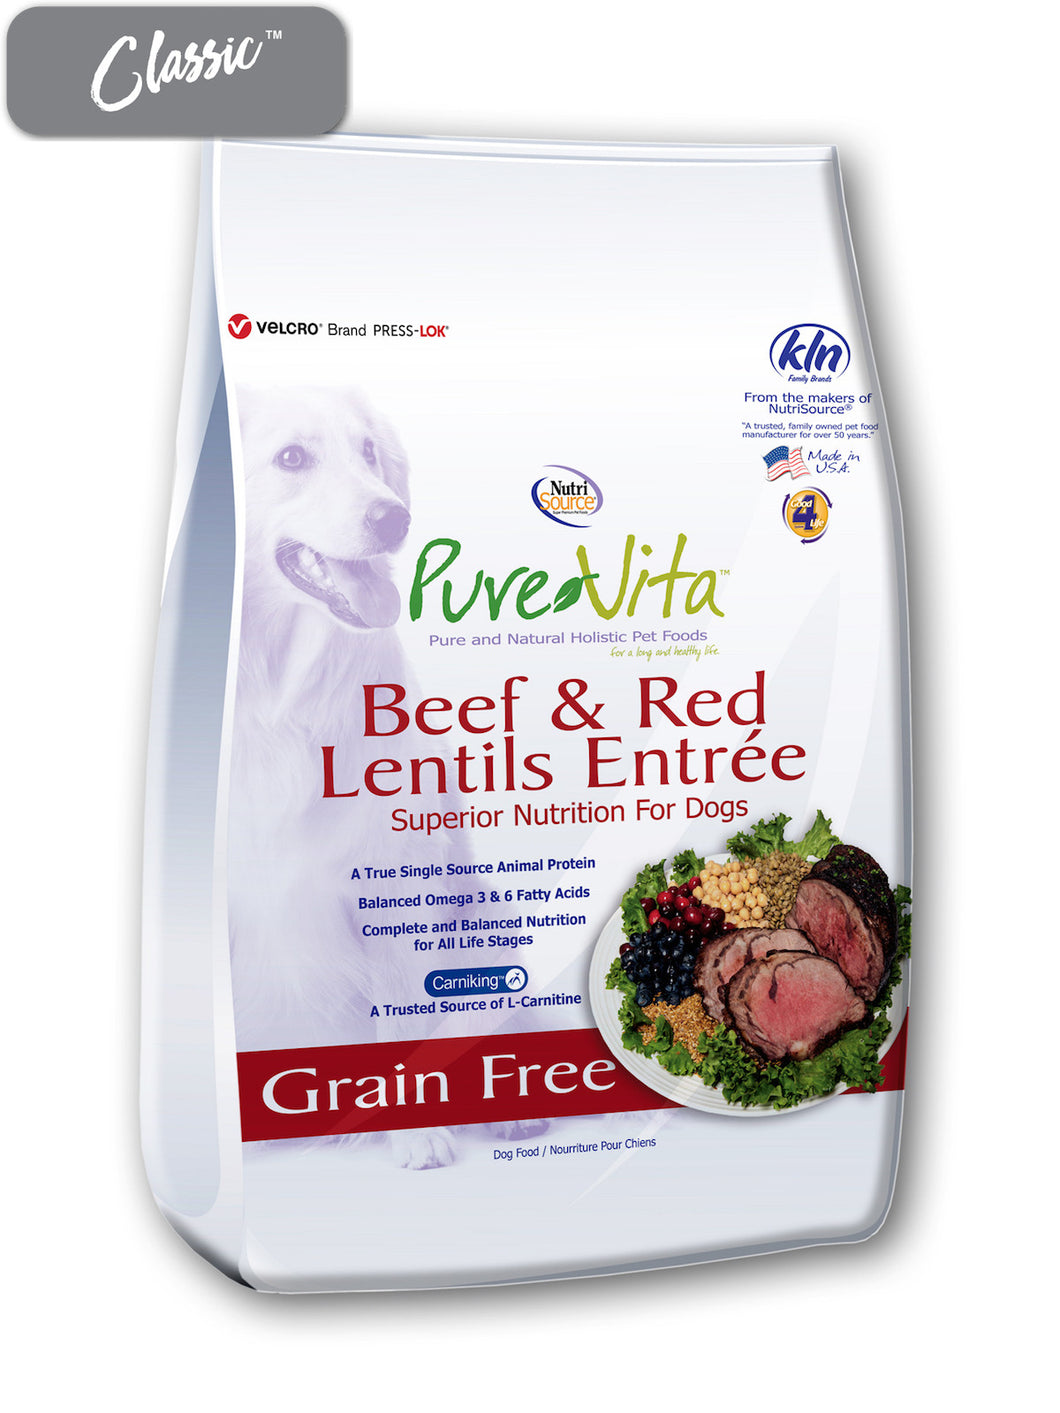 are lentils ok to feed dogs